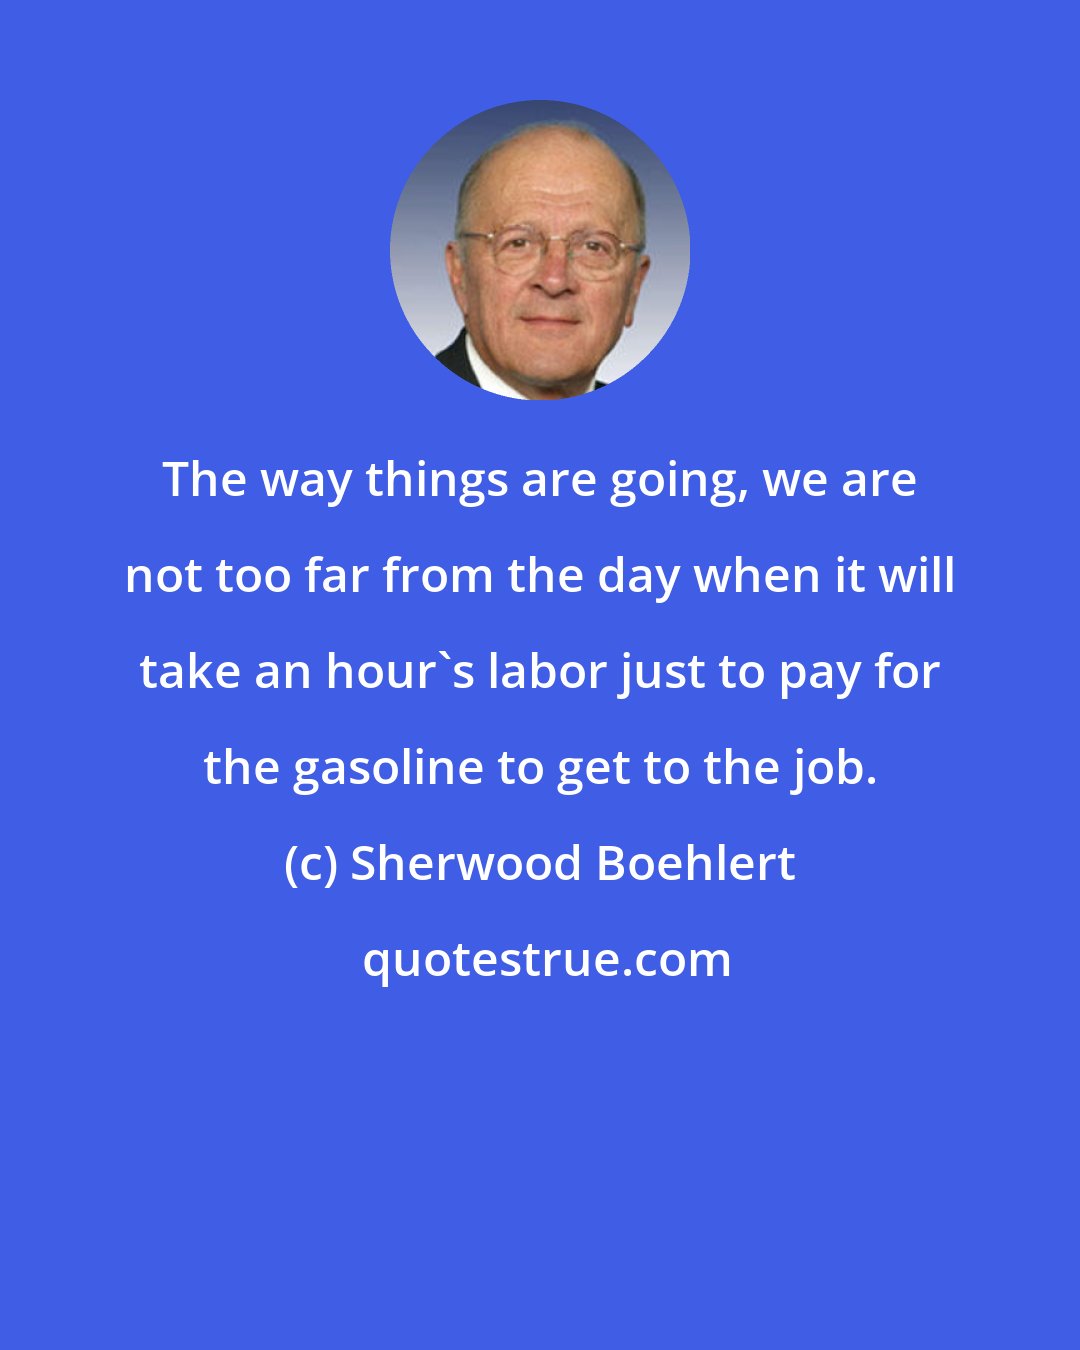 Sherwood Boehlert: The way things are going, we are not too far from the day when it will take an hour's labor just to pay for the gasoline to get to the job.